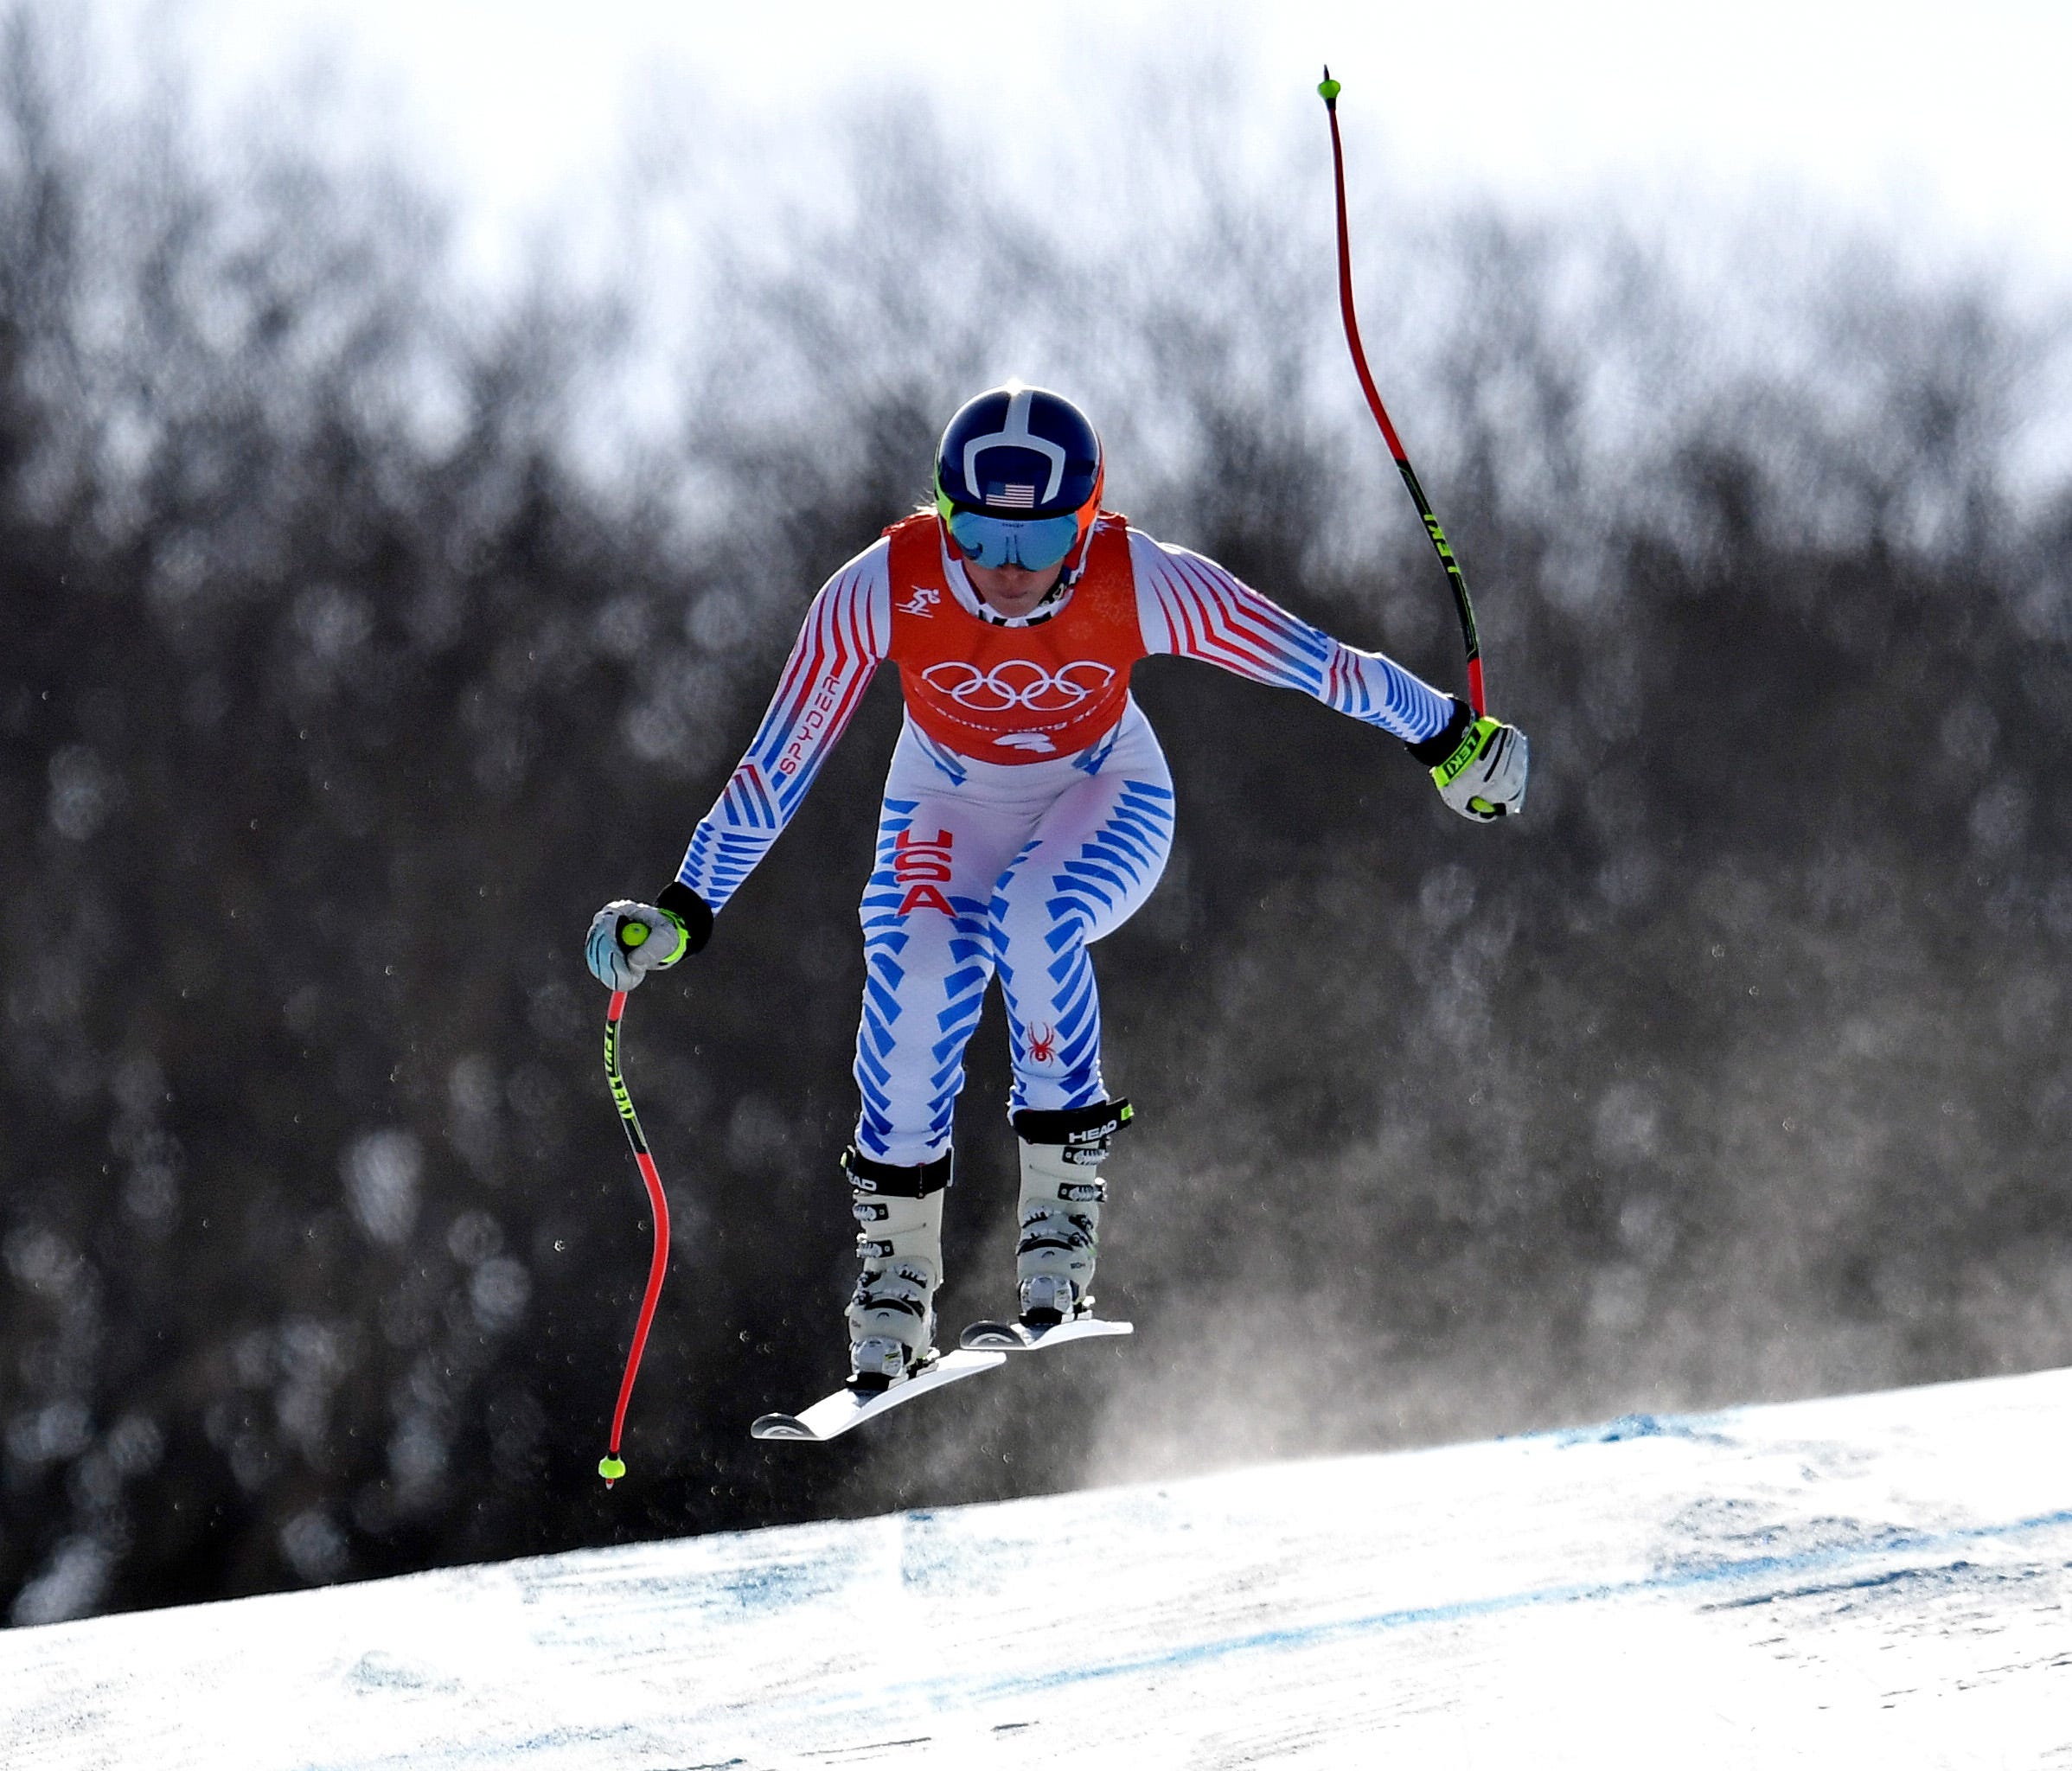 Lindsey Vonn (USA) during training for the women's downhill alpine skiing race.